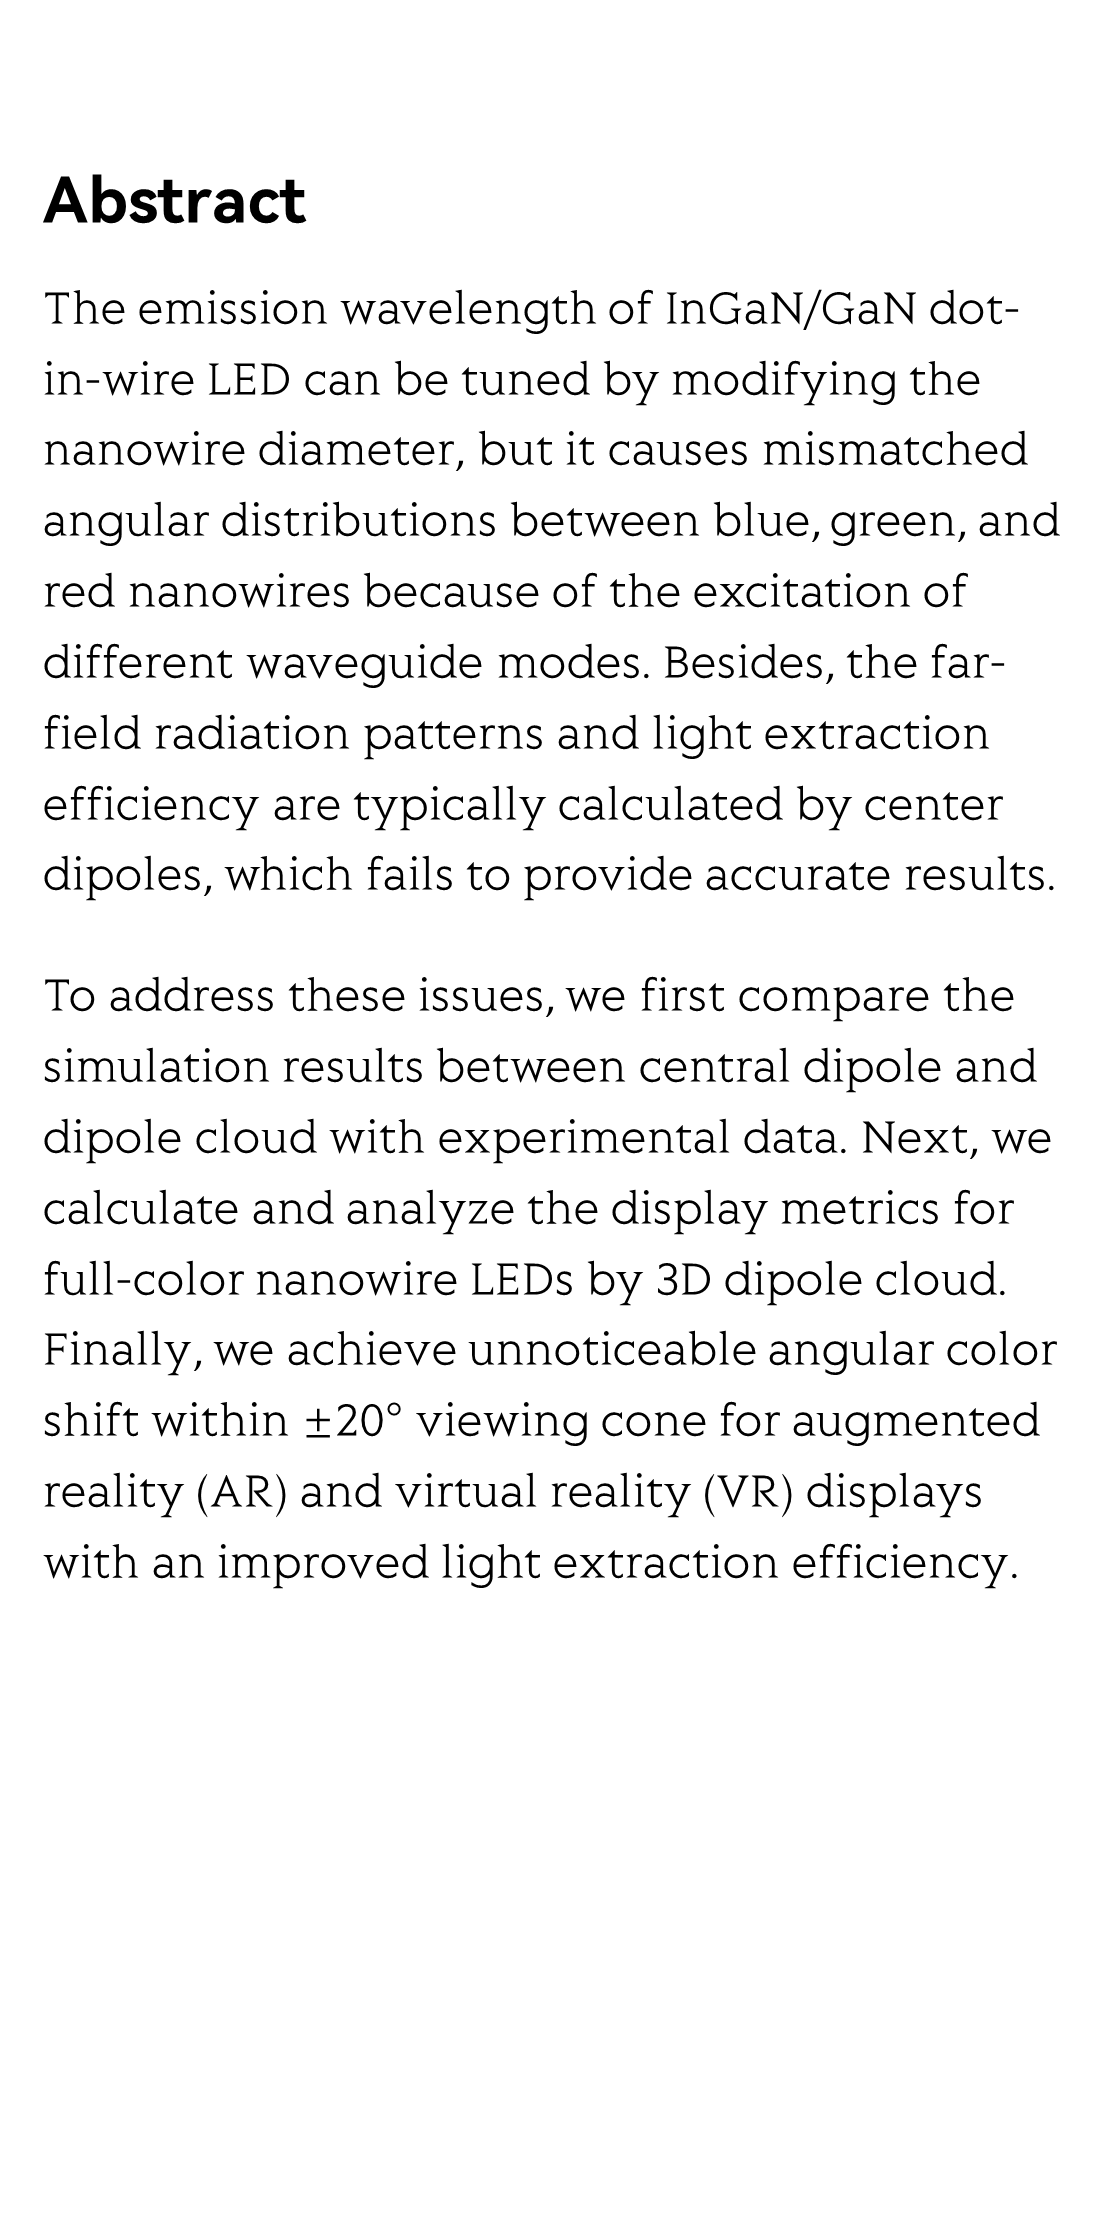 Directional high-efficiency nanowire LEDs with reduced angular color shift for AR and VR displays_2